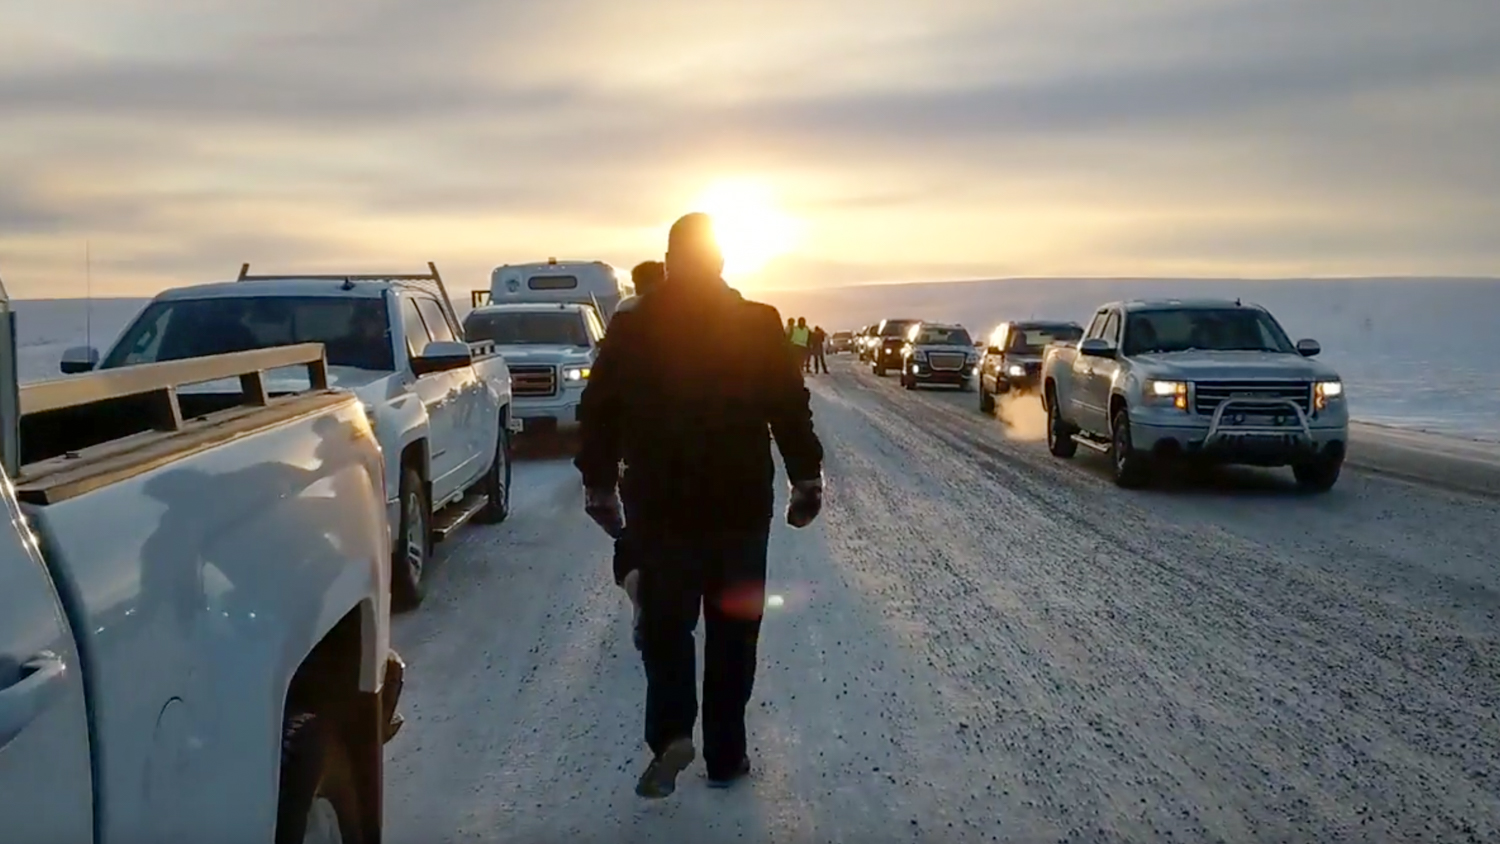 Attendees gather on the Inuvik-Tuk highway during an inaugural procession along the road on its opening day in November 2017